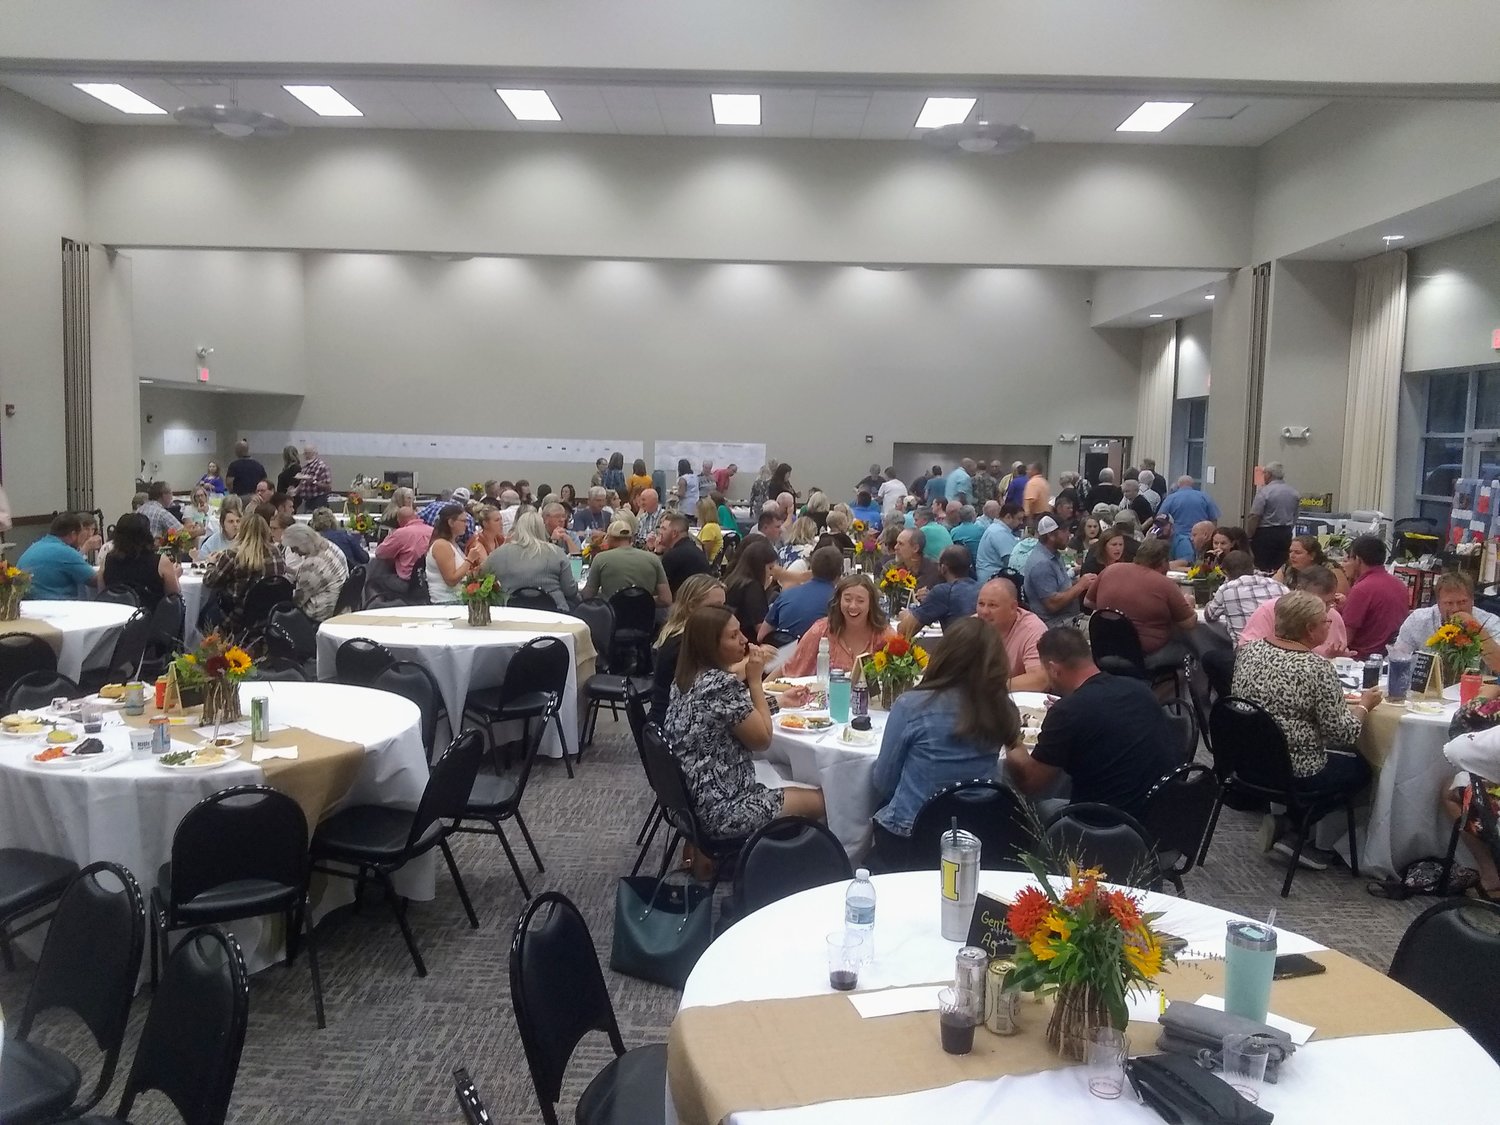 Community members enjoyed dinner together at Wellman’s Parkside YMCA before the live auction portion of the evening.